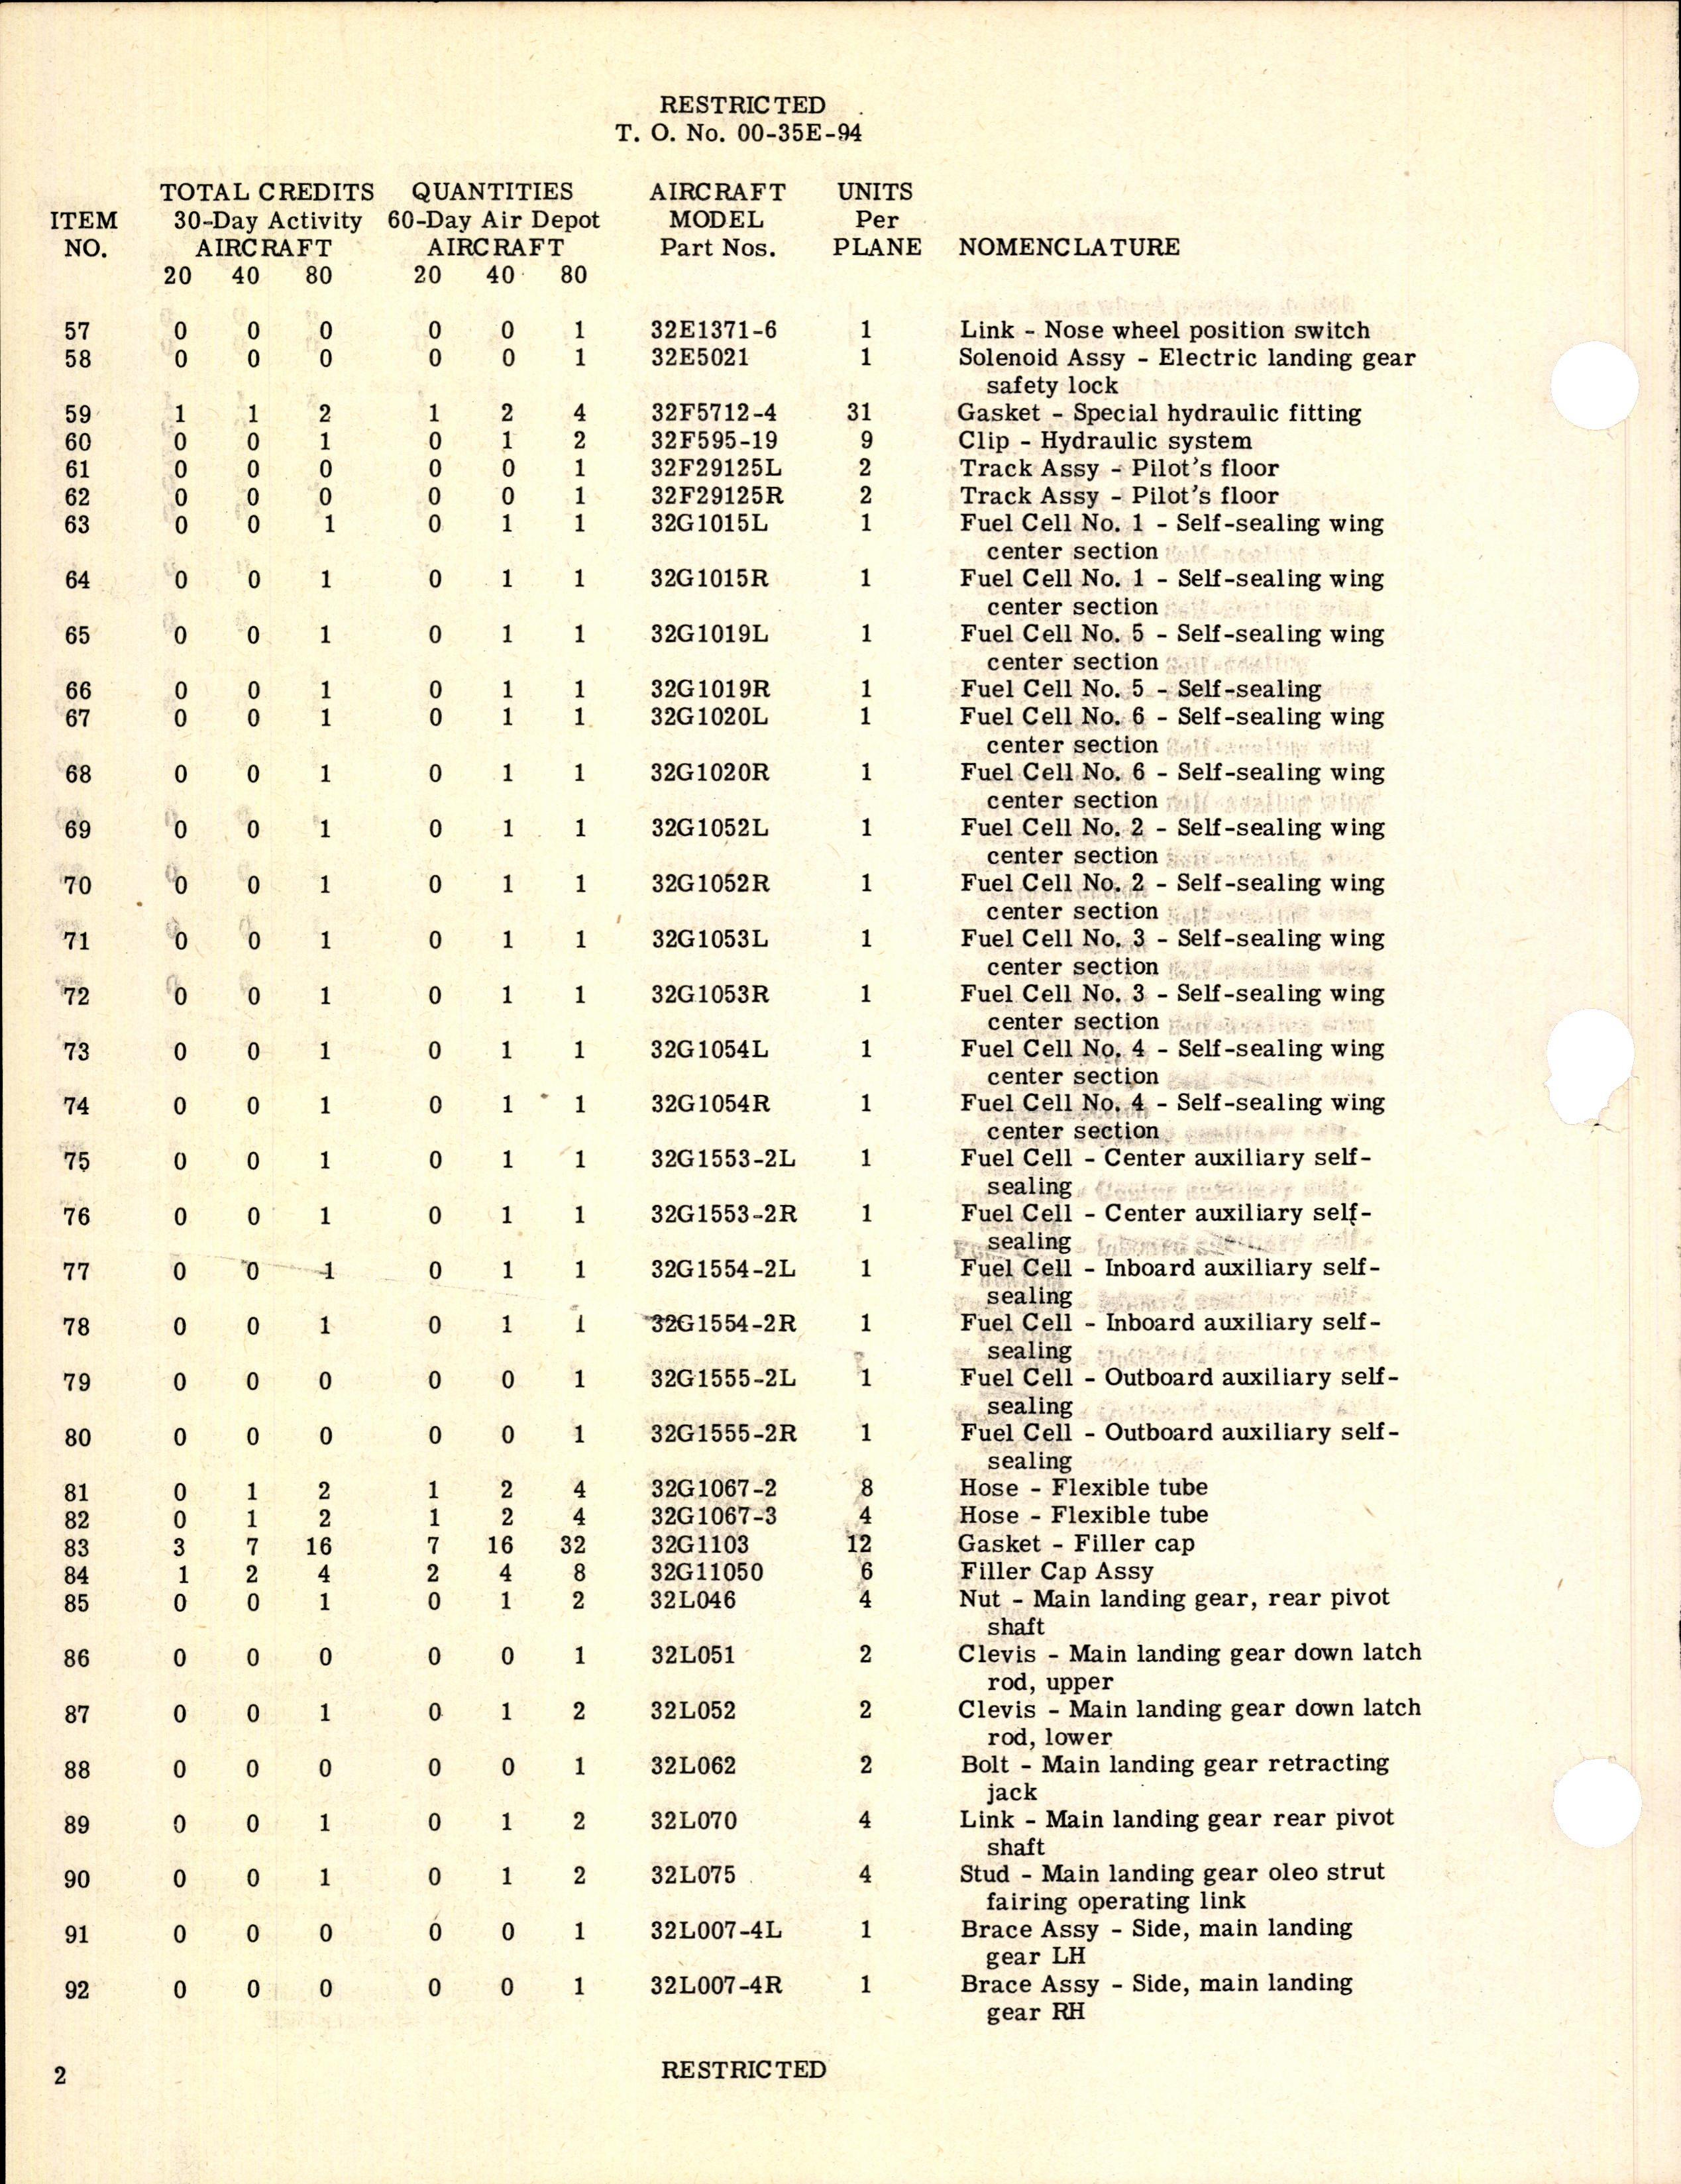 Sample page 4 from AirCorps Library document: Table of Credit Aircraft Maintenance Parts for B-24H, J, and L Aircraft